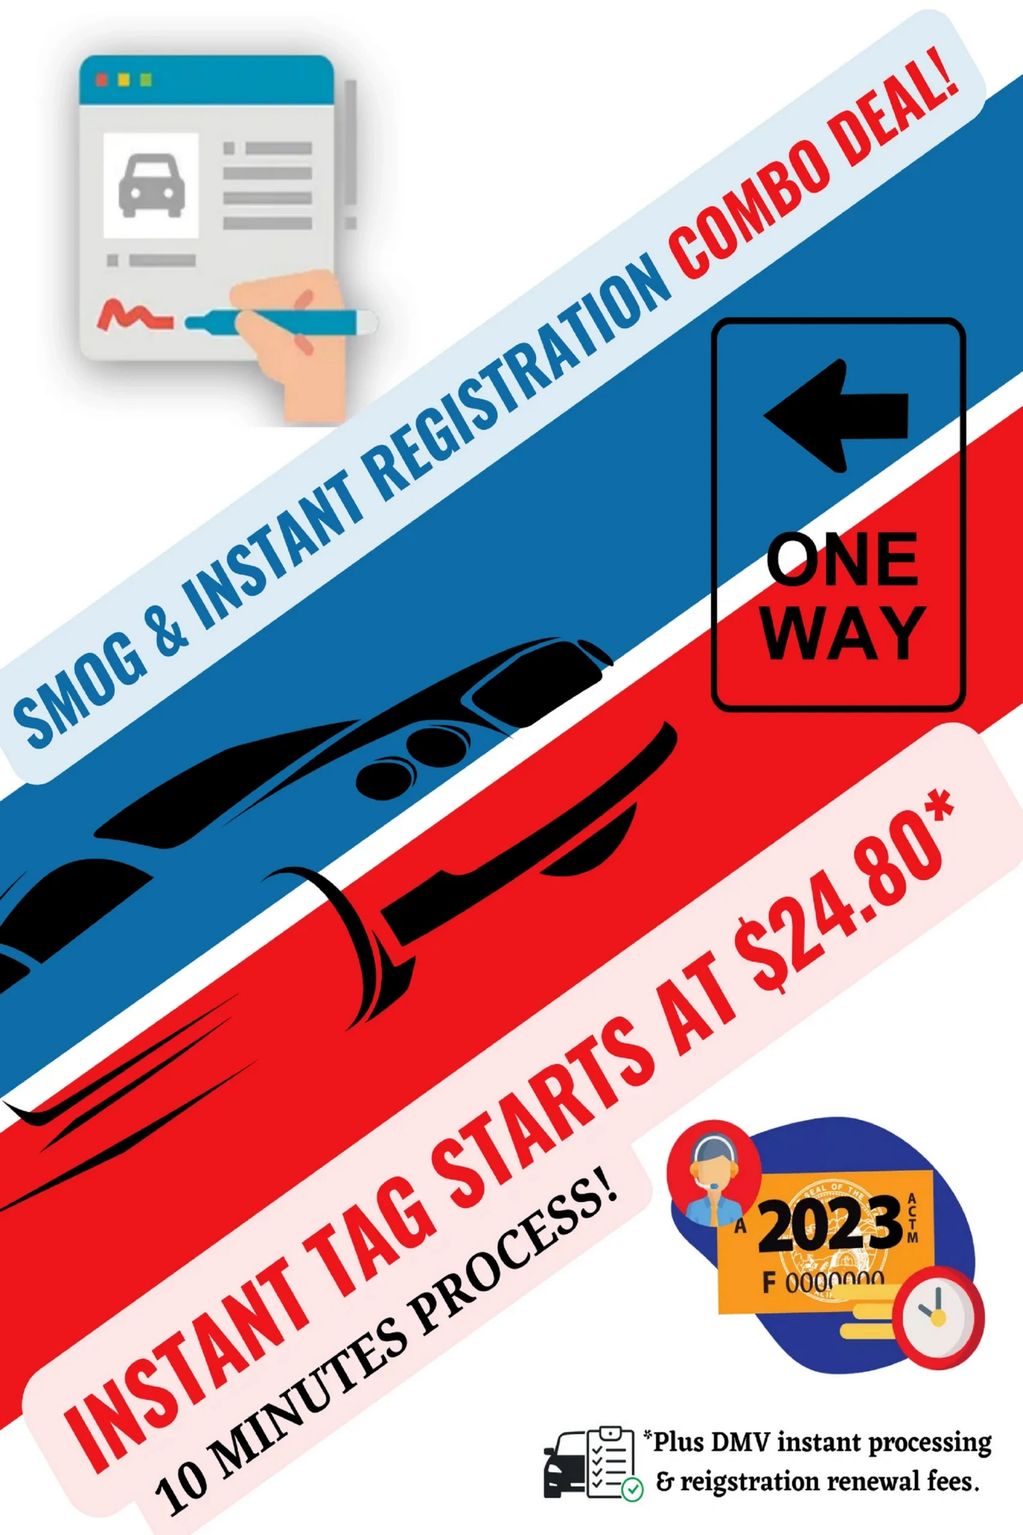 Get Instant Registration Stickers Starting @ $24.80 for Renewals when combined with your smog check 